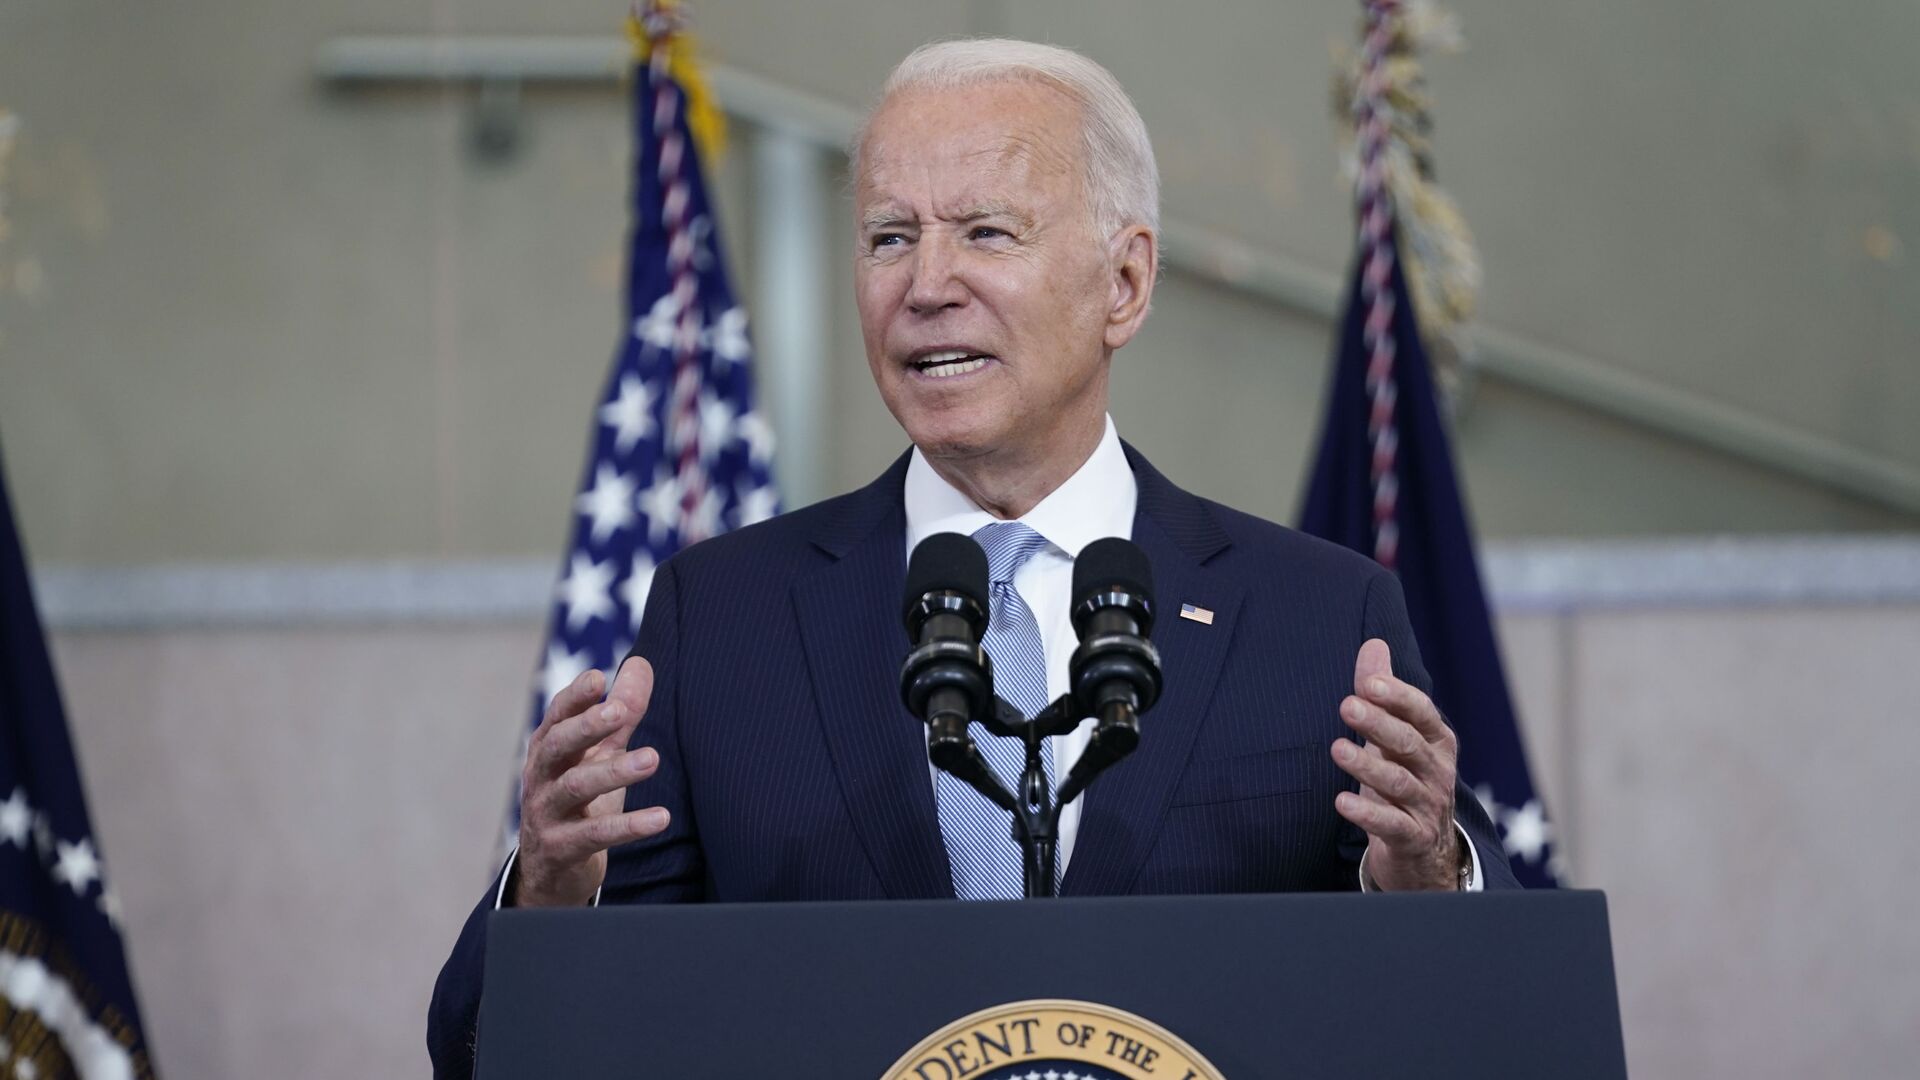 President Joe Biden delivers a speech on voting rights at the National Constitution Center, Tuesday, July 13, 2021, in Philadelphia. - Sputnik 日本, 1920, 22.07.2021